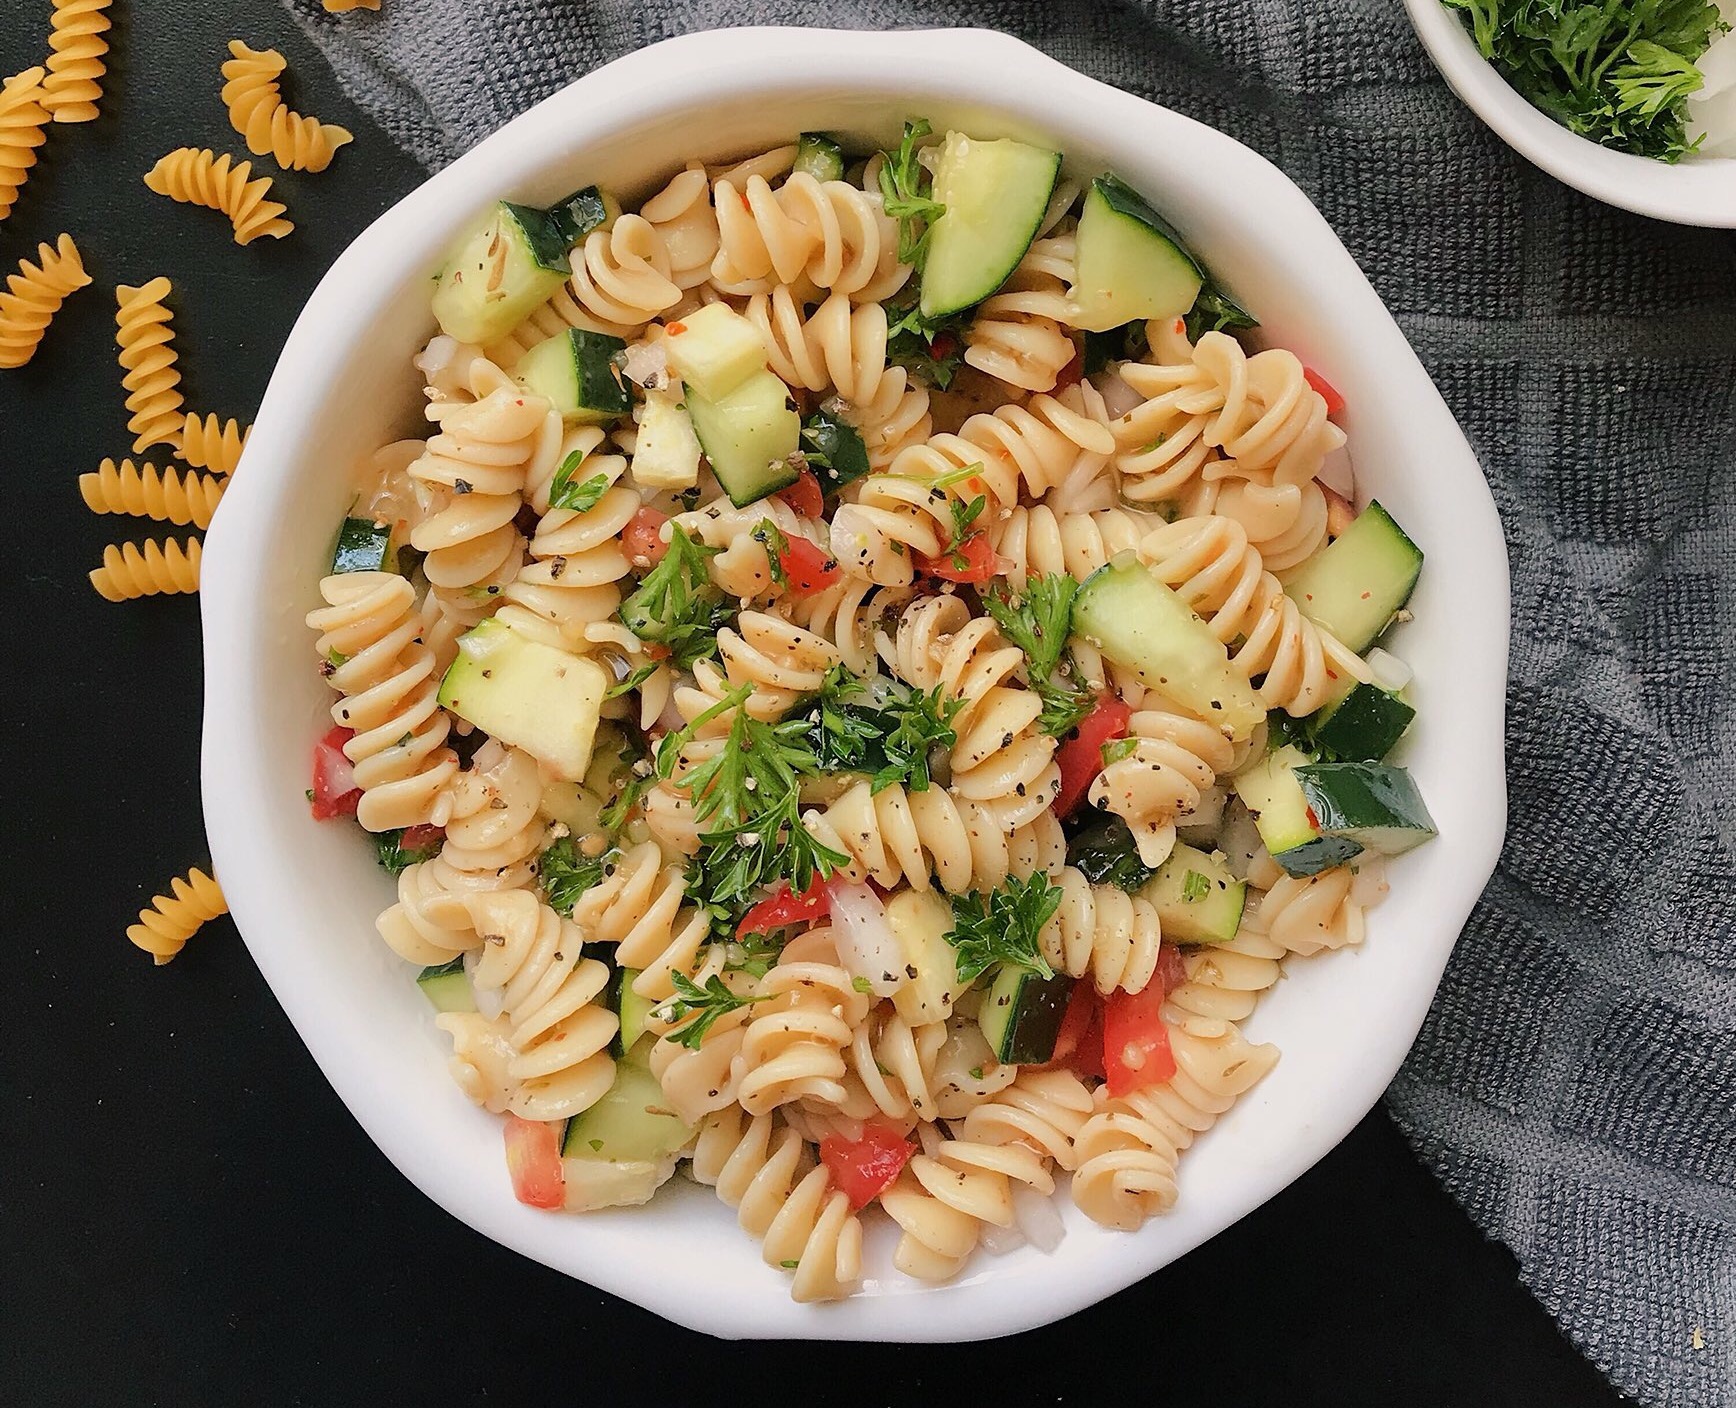 Travel Noire Eats And Recipes: Summertime Pasta Salad